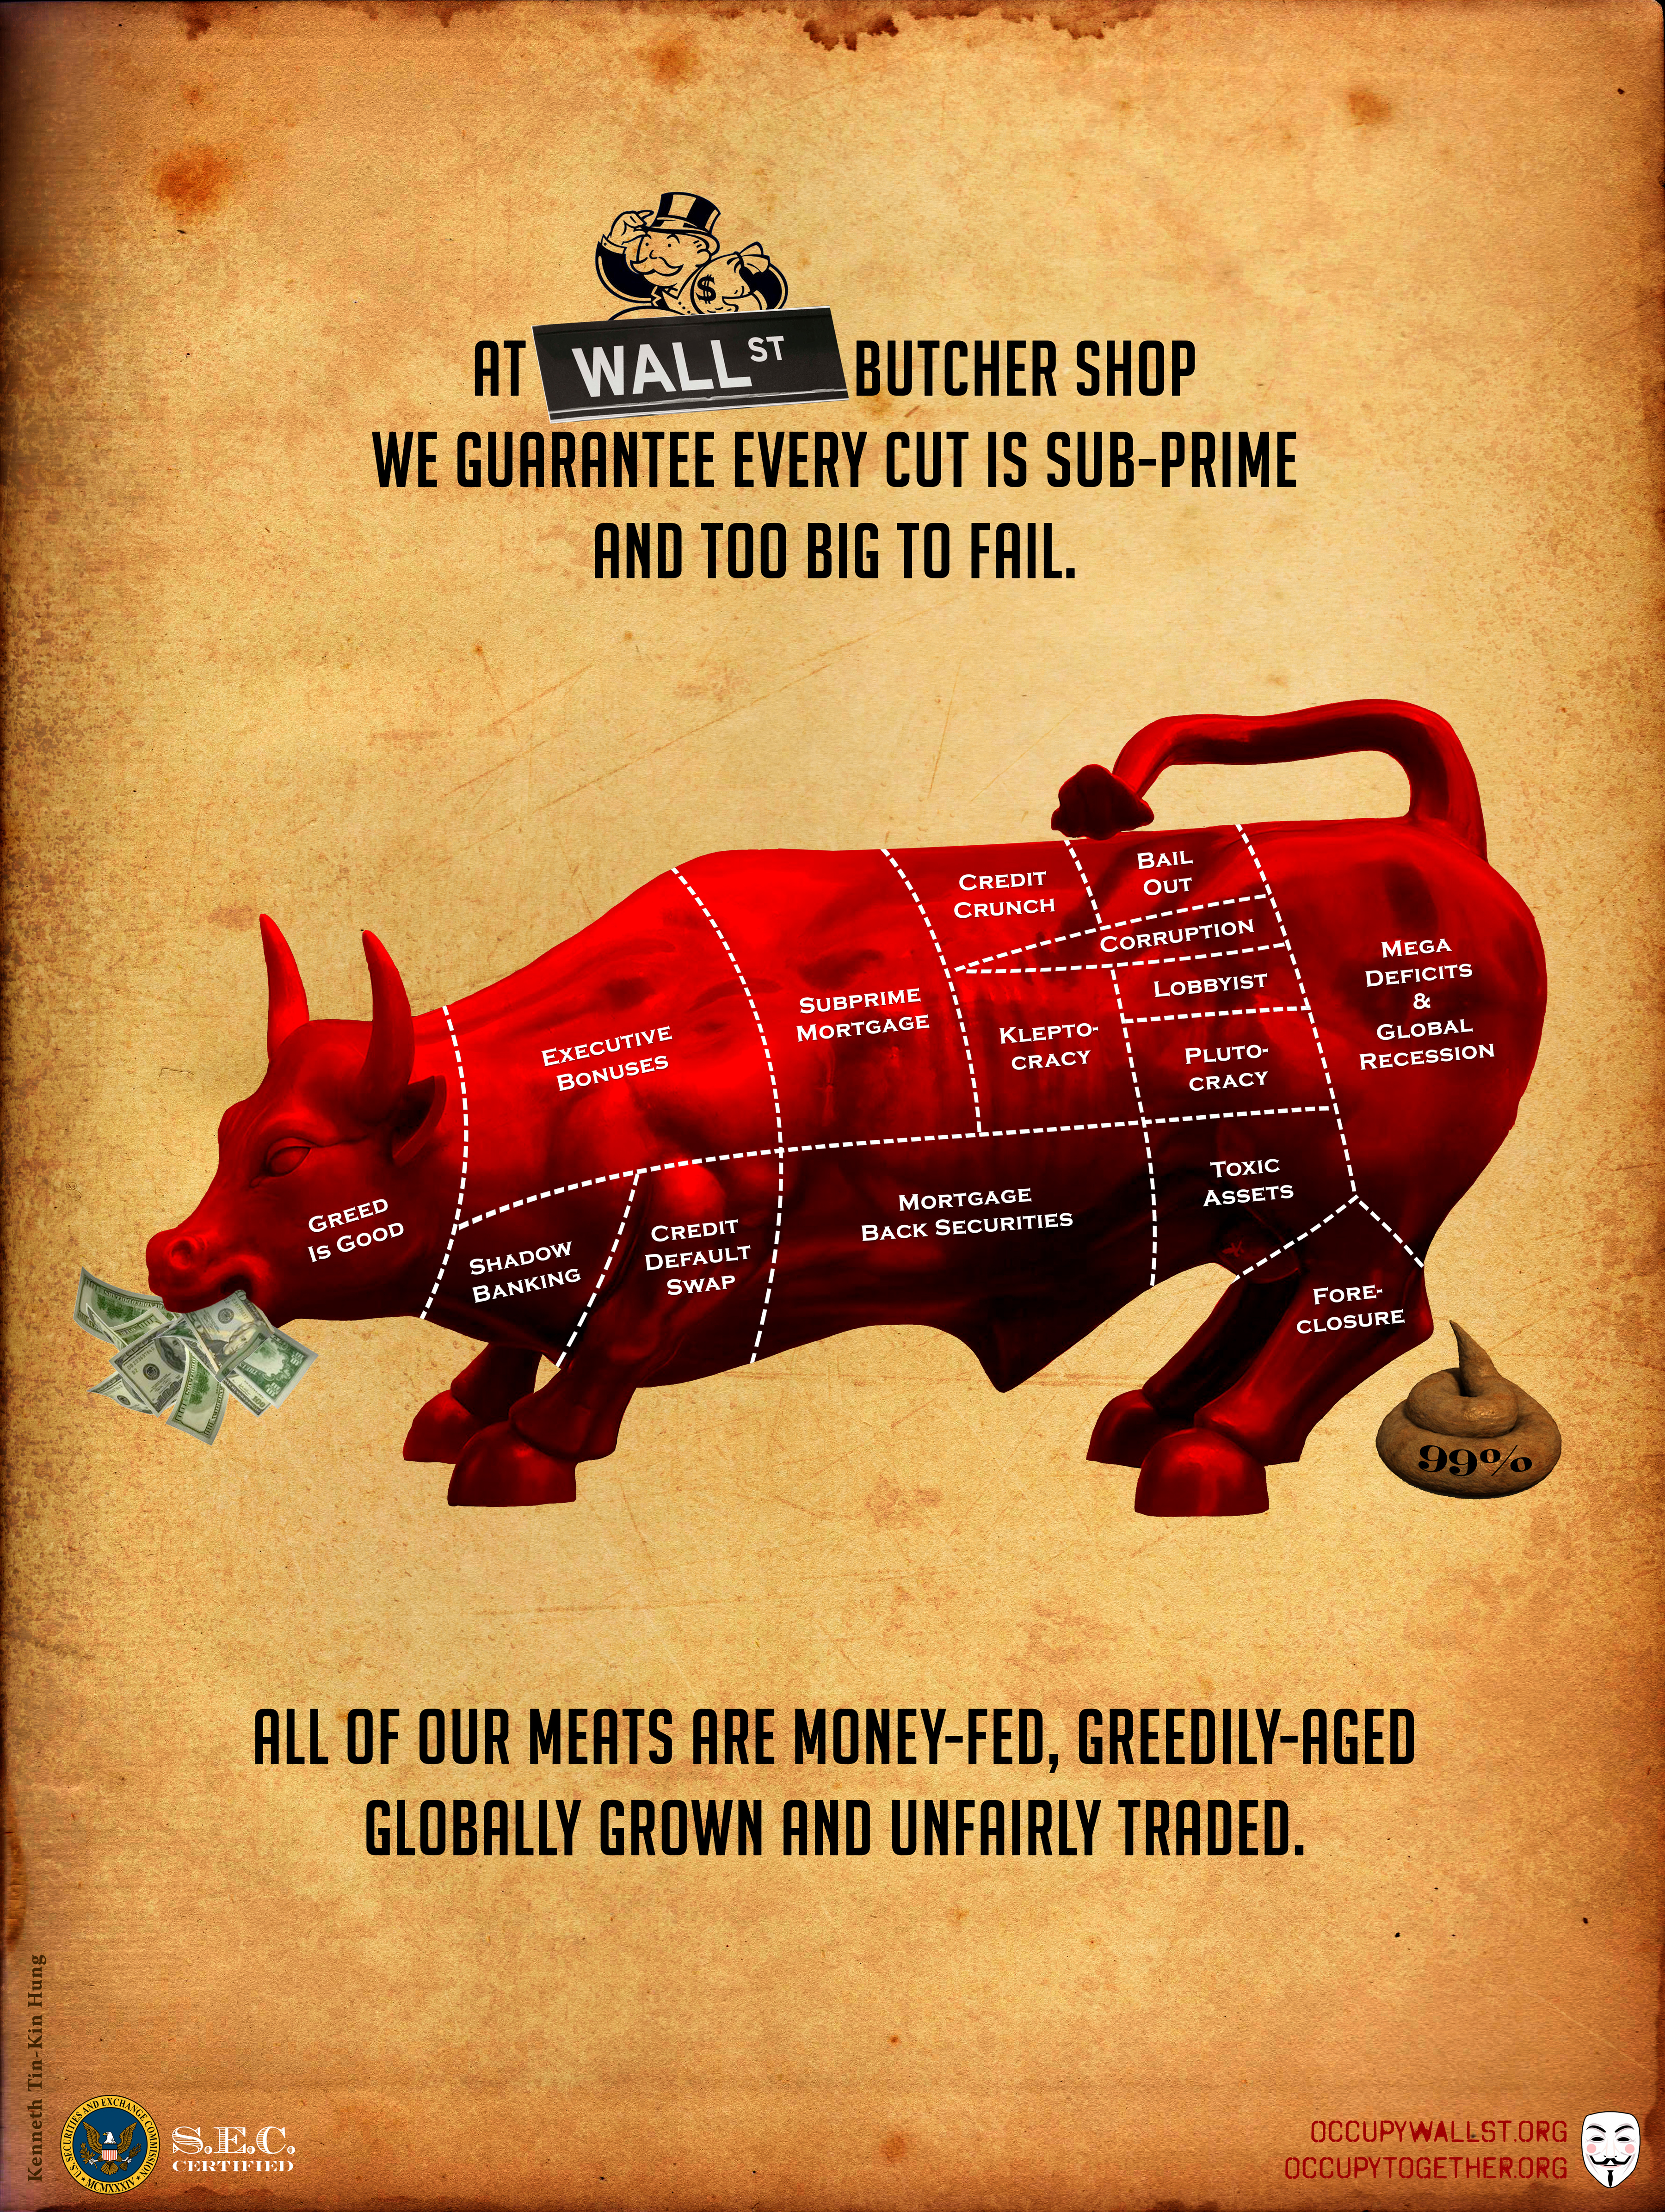 Wall Street Bull During Occupy - HD Wallpaper 